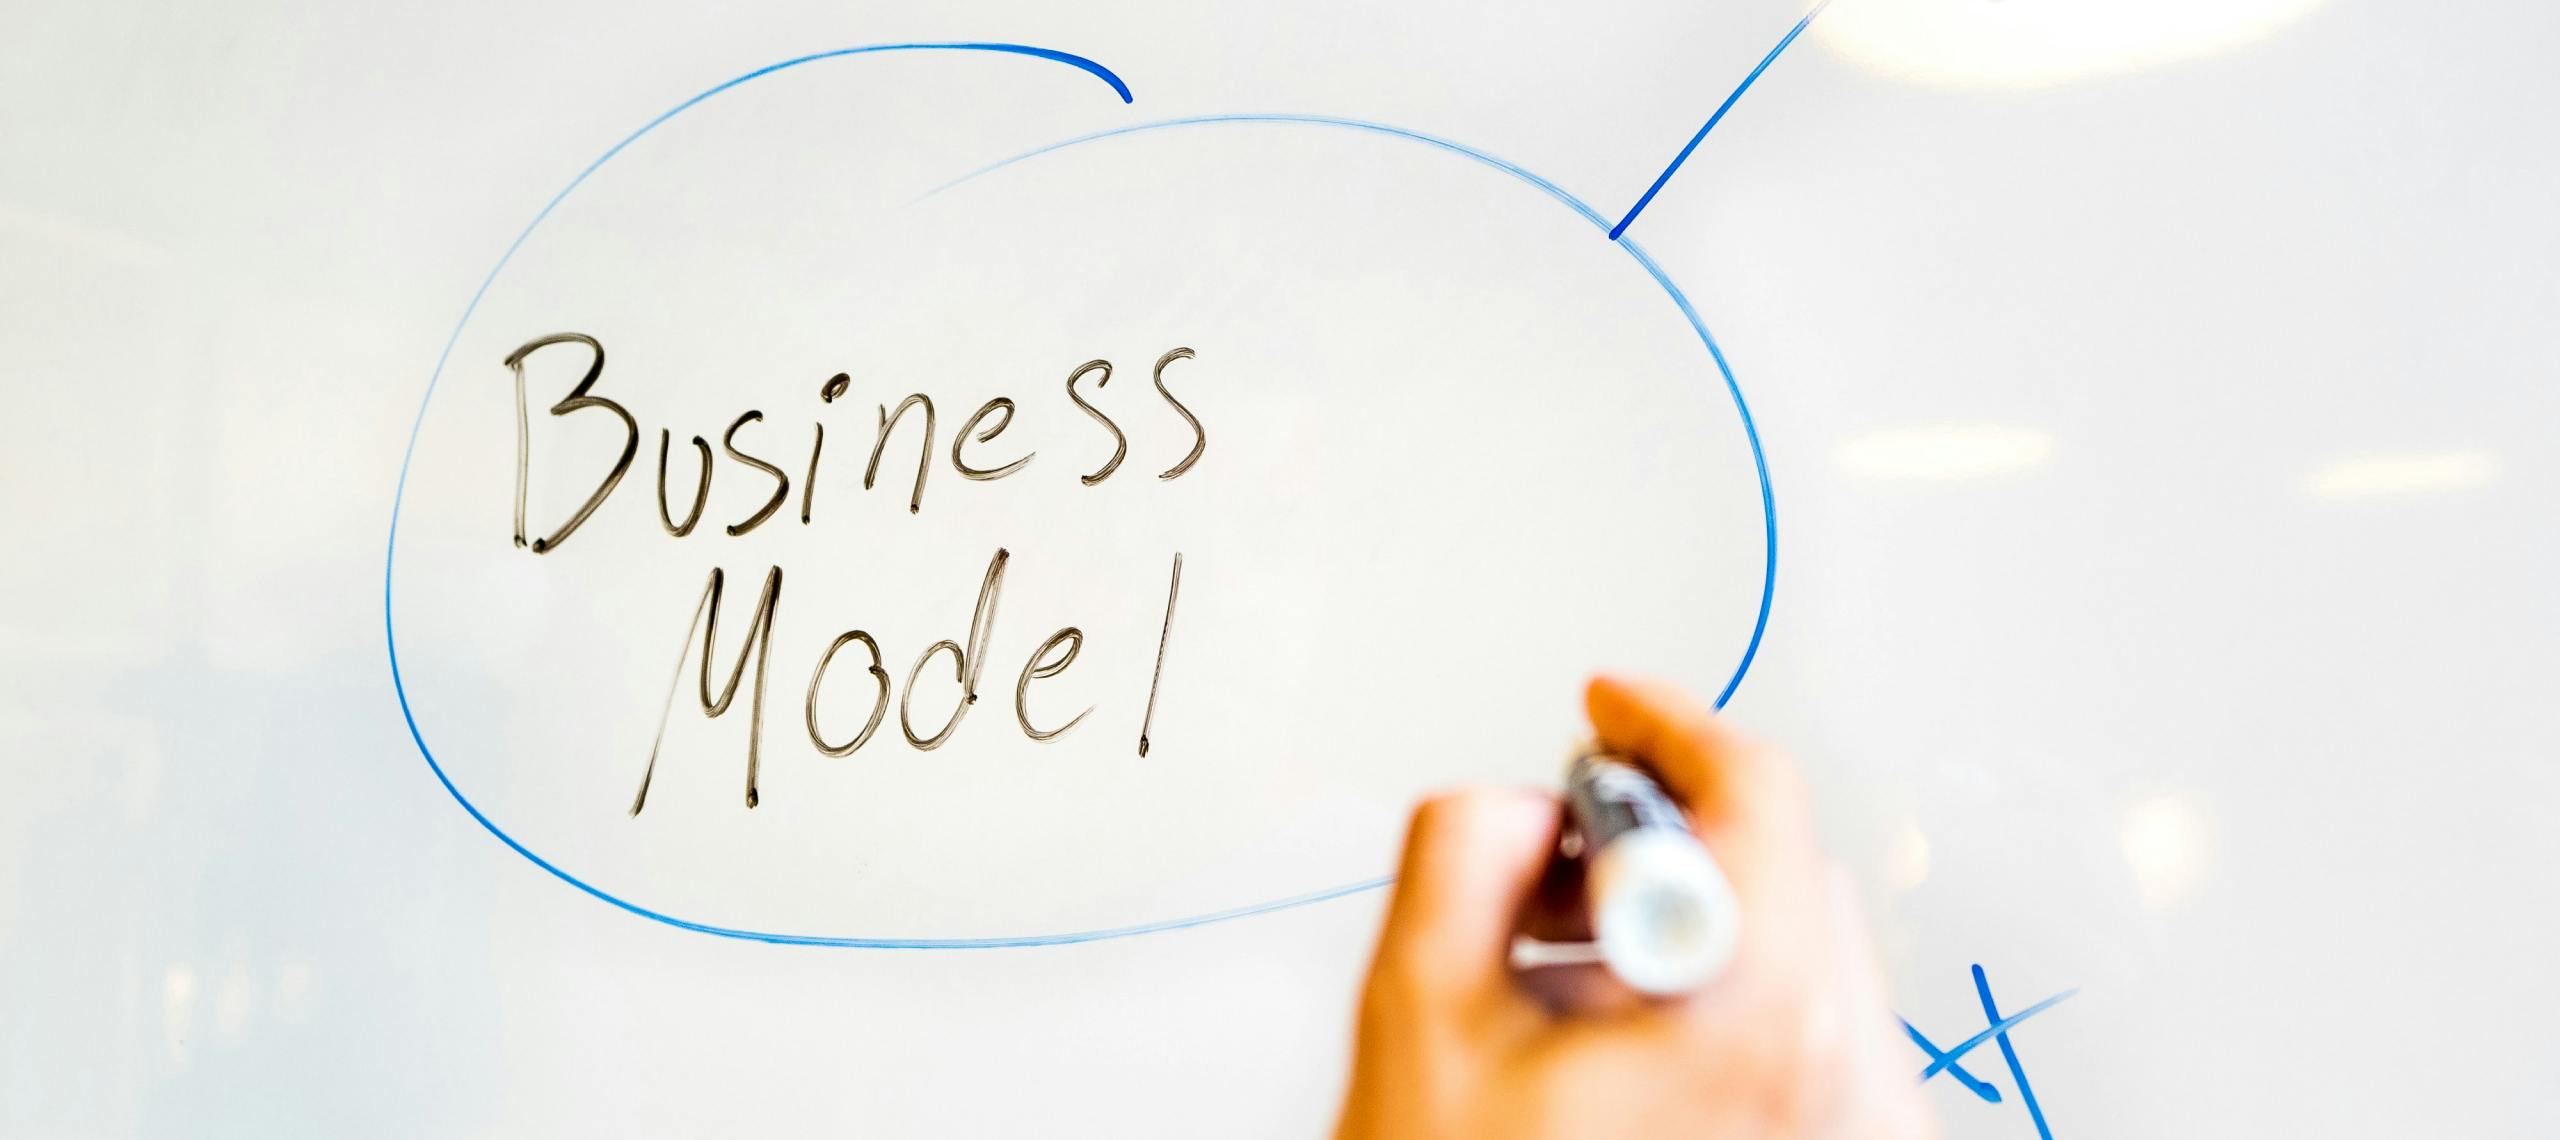 A person plans their business model by writing on a whiteboard.